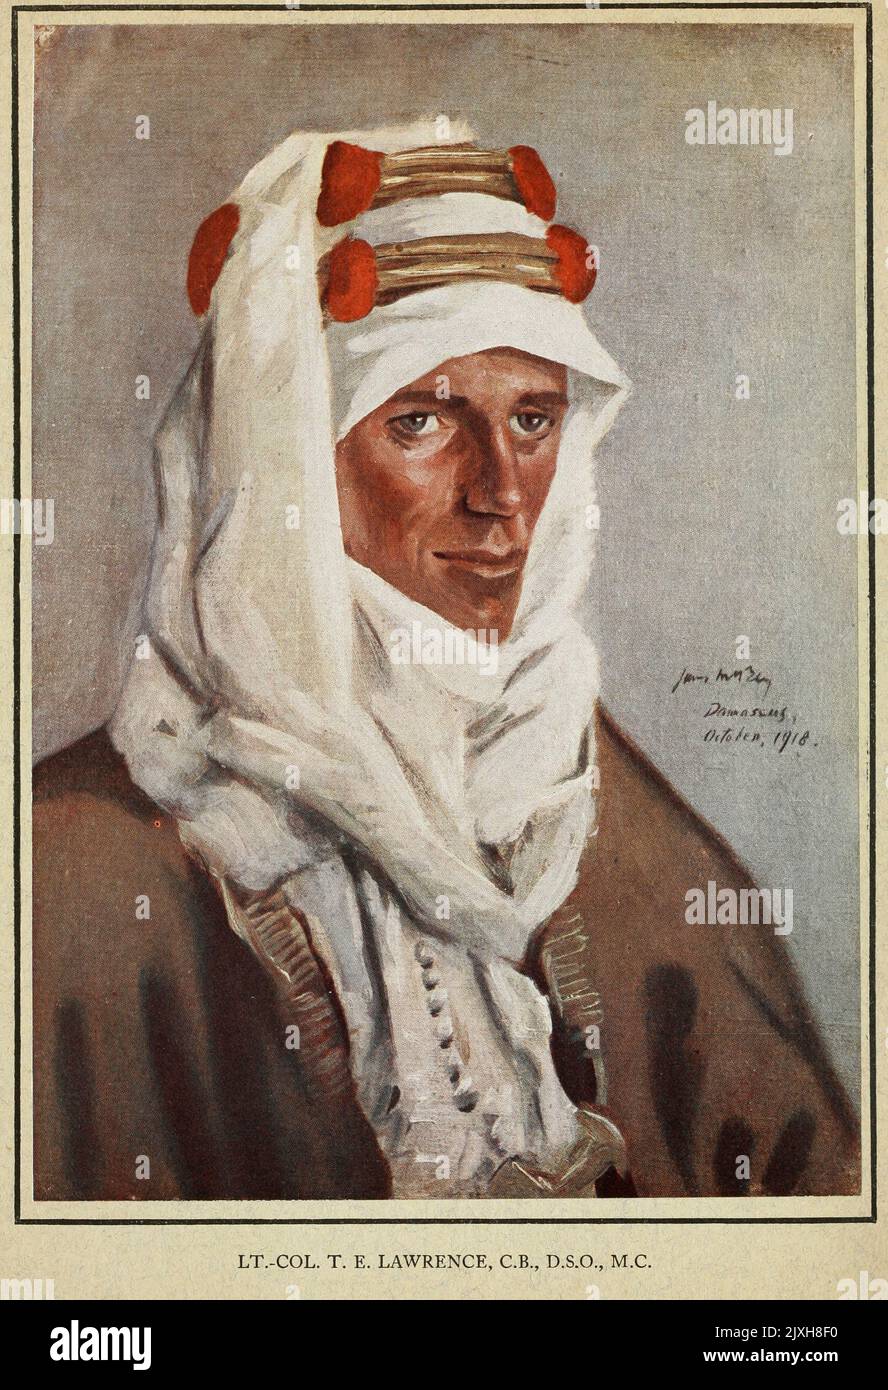 Colonel Thomas Edward Lawrence CB DSO (16 August 1888 – 19 May 1935) was a British archaeologist, army officer, diplomat, and writer, who became renowned for his role in the Arab Revolt (1916–1918) and the Sinai and Palestine Campaign (1915–1918) against the Ottoman Empire during the First World War. The breadth and variety of his activities and associations, and his ability to describe them vividly in writing, earned him international fame as Lawrence of Arabia, a title used for the 1962 film based on his wartime activities. from the book ' NILE TO ALEPPO ' BY HECTOR DINNING CAPTAIN. AUSTRALI Stock Photo